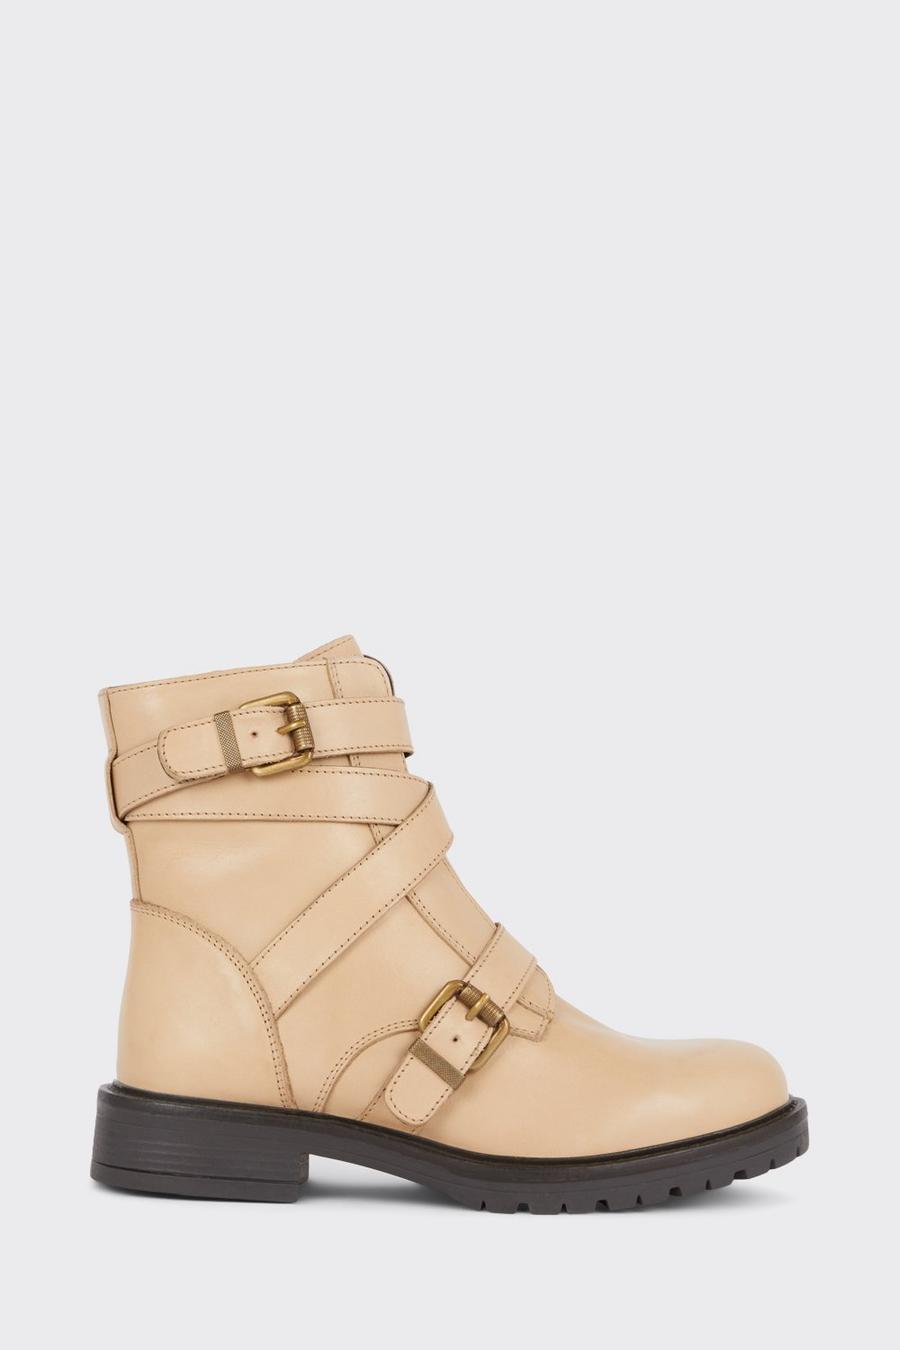 Good For the Sole: Rowan Double Strap Leather Biker Boot